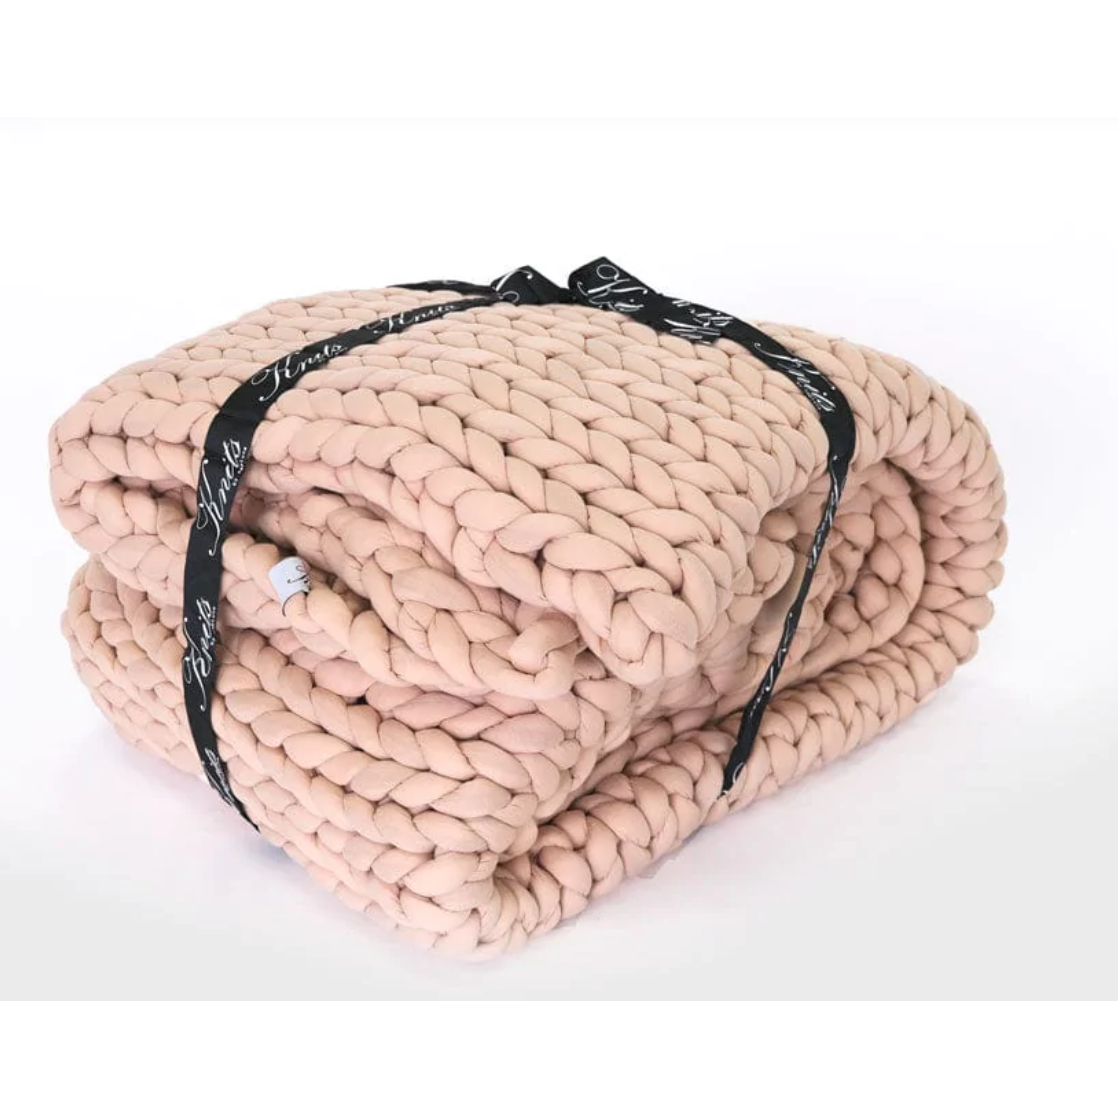 Neptune Knitted Weighted Blanket - The Sensory Poodle